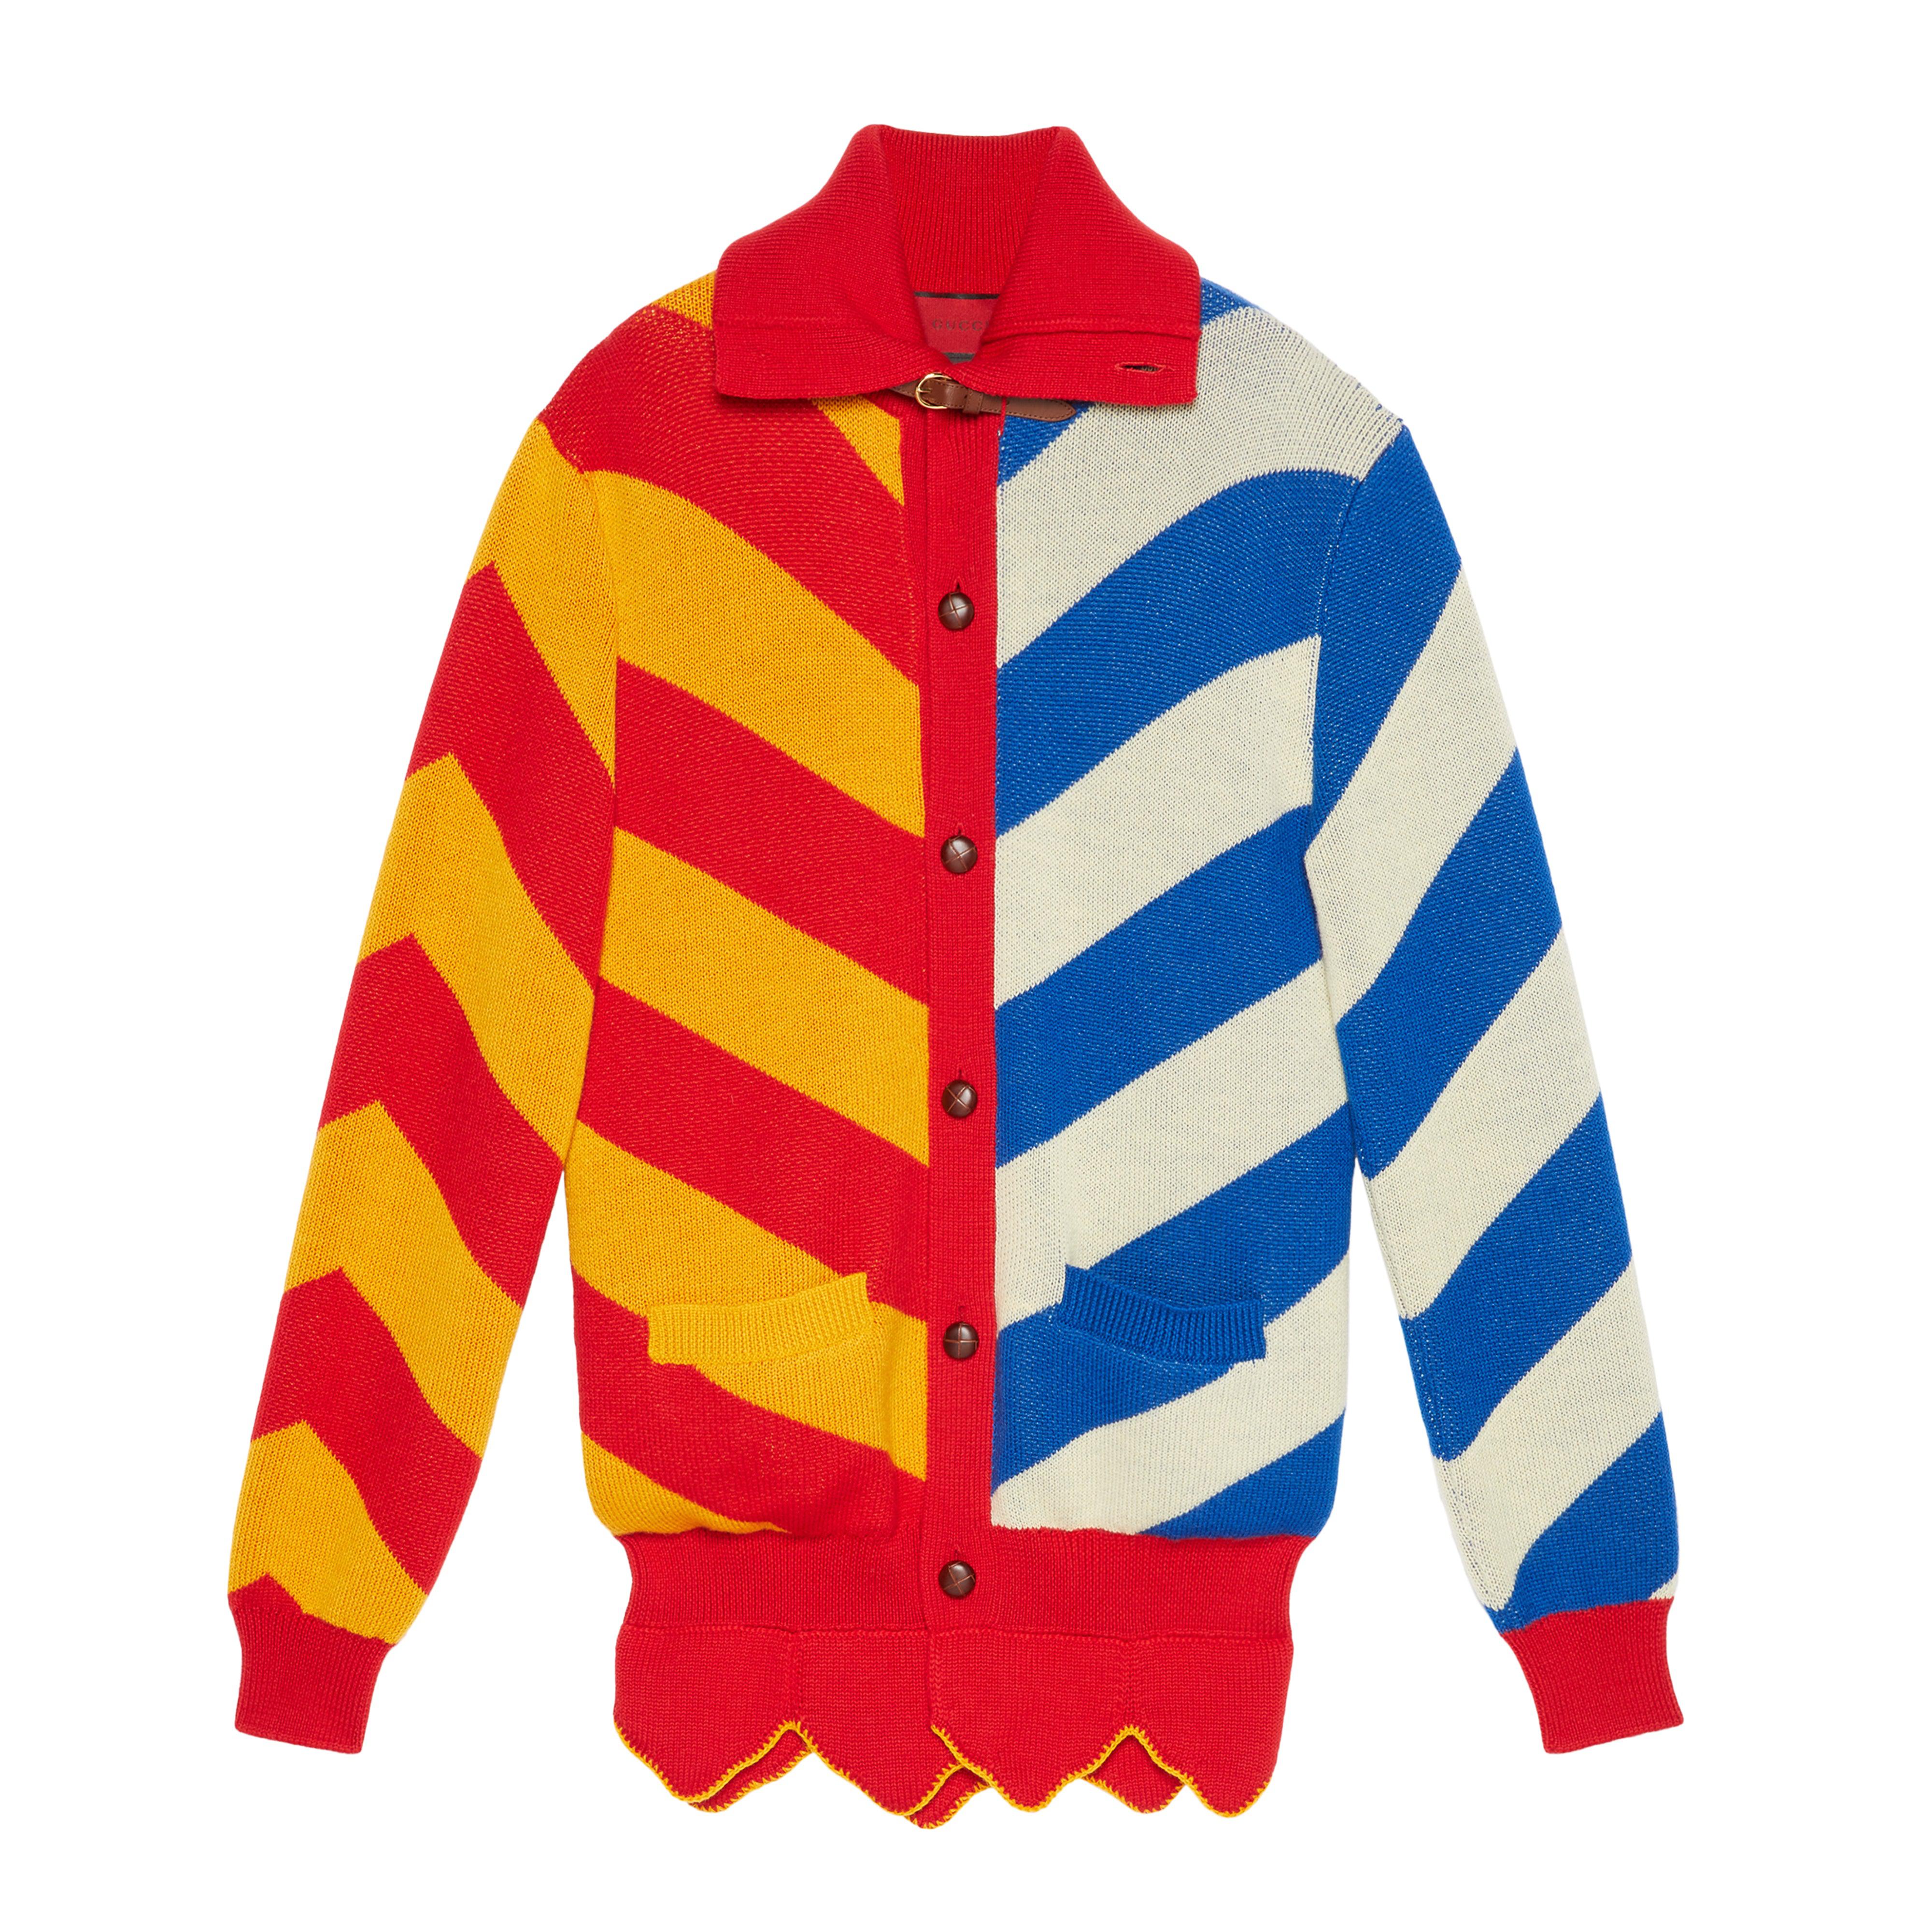 Gucci Men's DSM Exclusive Striped Wool Knitted Cardigan (Live Red) by GUCCI